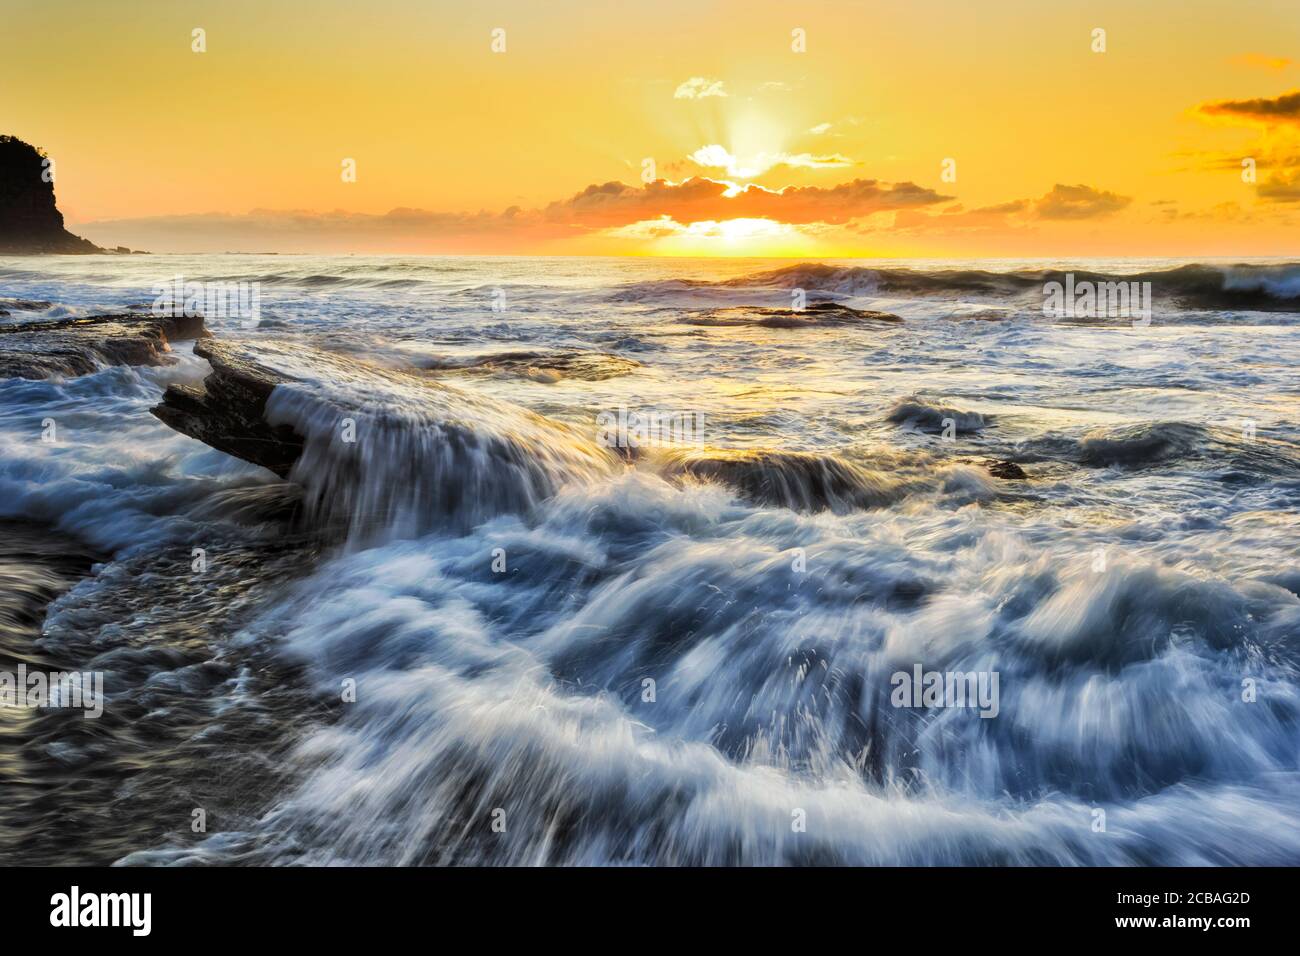 Sun over Pacific ocean horizon at Bungan beach of Sydney Northern beaches at sunrise with strong waves. Stock Photo